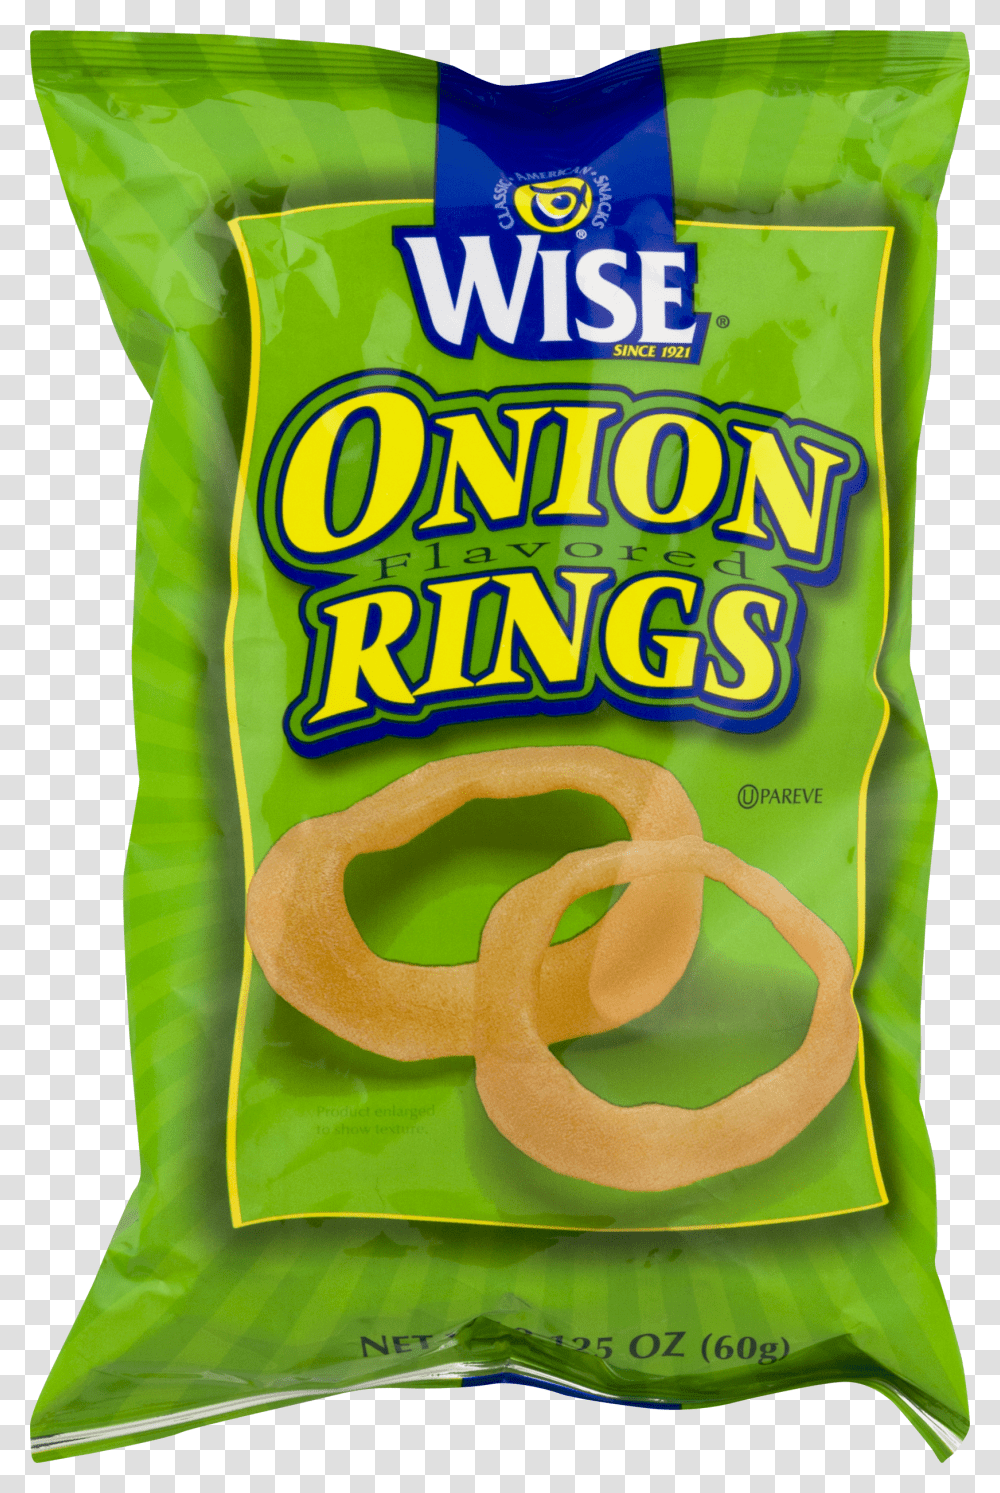 Wise Onion Rings Wise Onion Flavored Rings Transparent Png